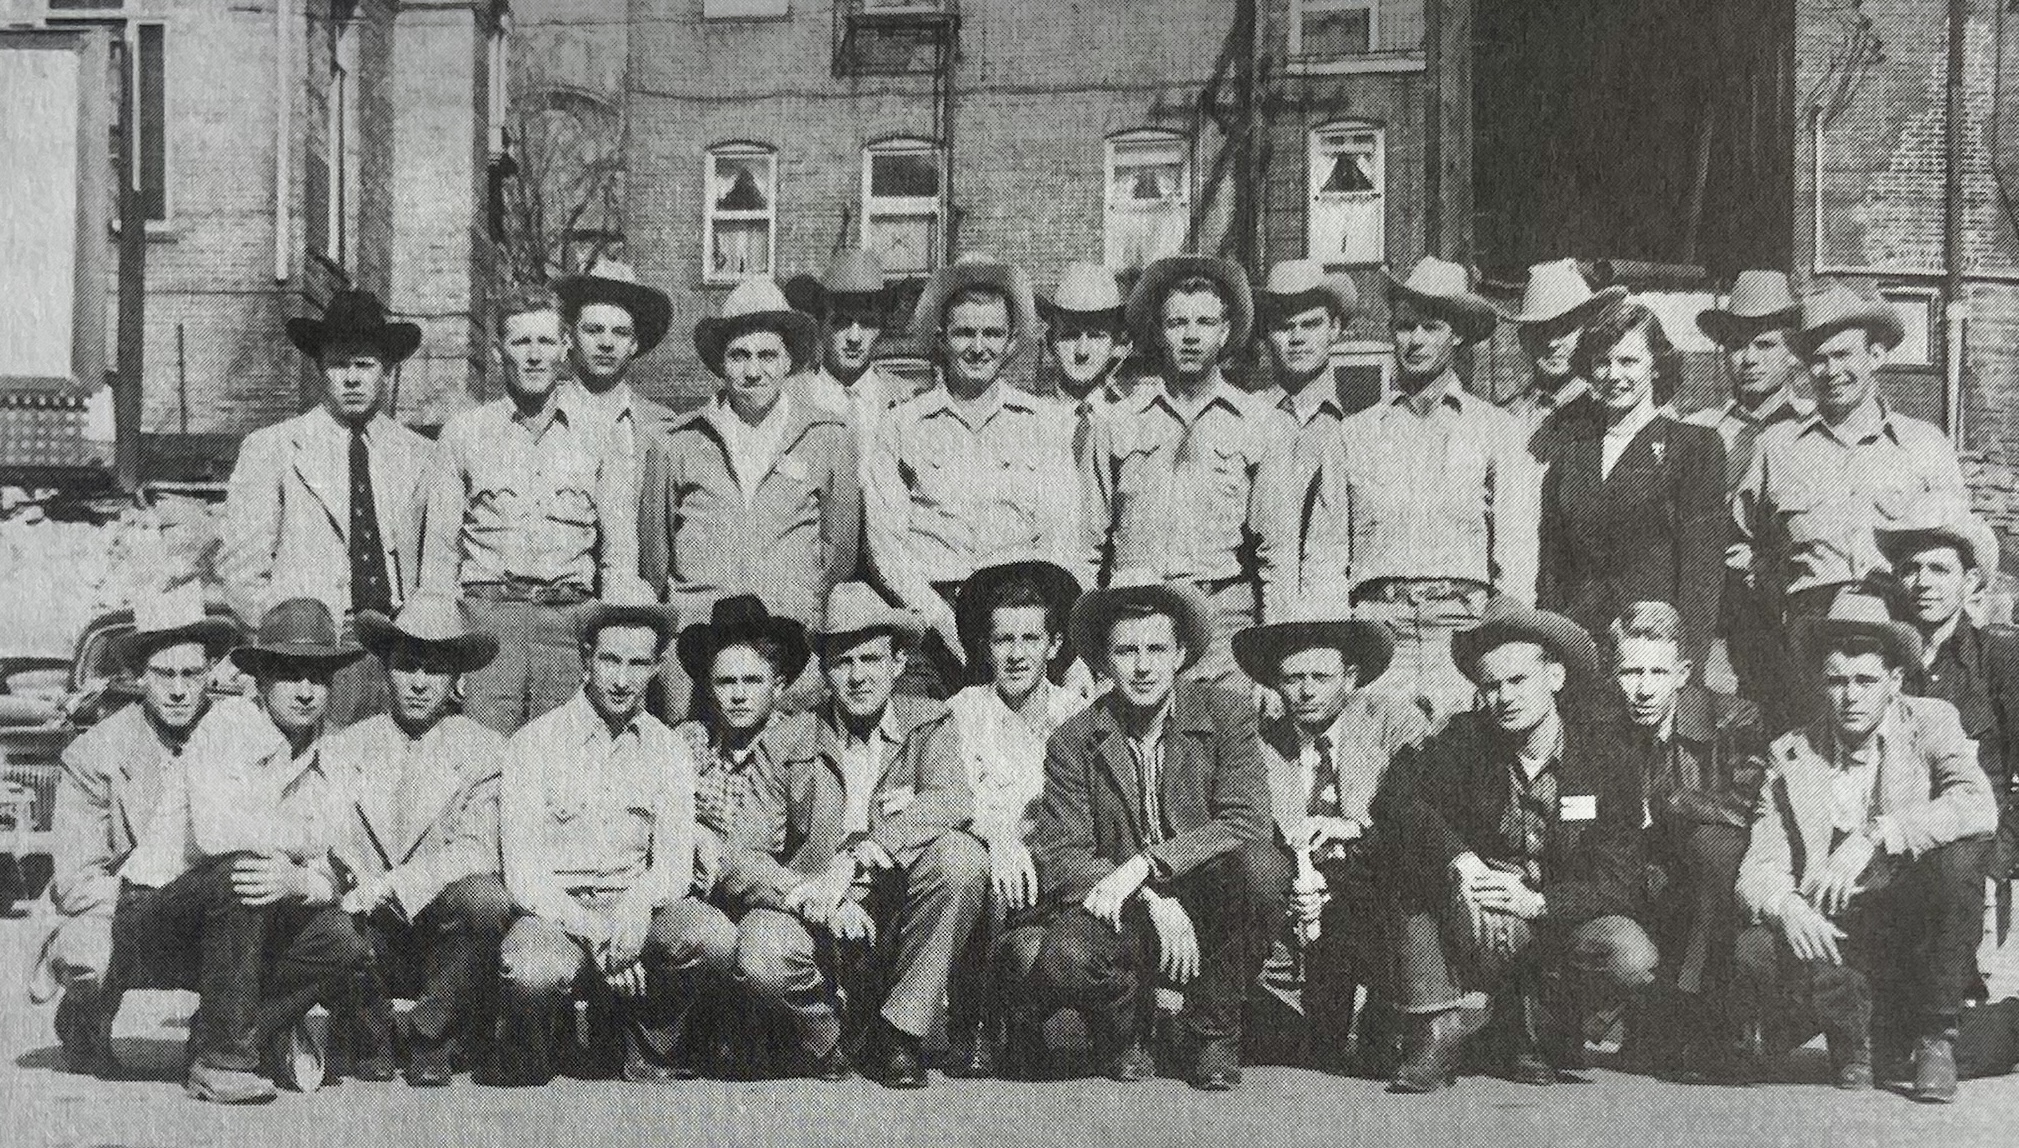 In April of 1949 in Denver, Colorado, Eldon Dudley was one of the delegates who attended the first National Intercollegiate Rodeo Association Convention ever held. The first College National Finals Rodeo was held that fall at the Cow Palace in San Francisco.
NIRA Courtesy Photo